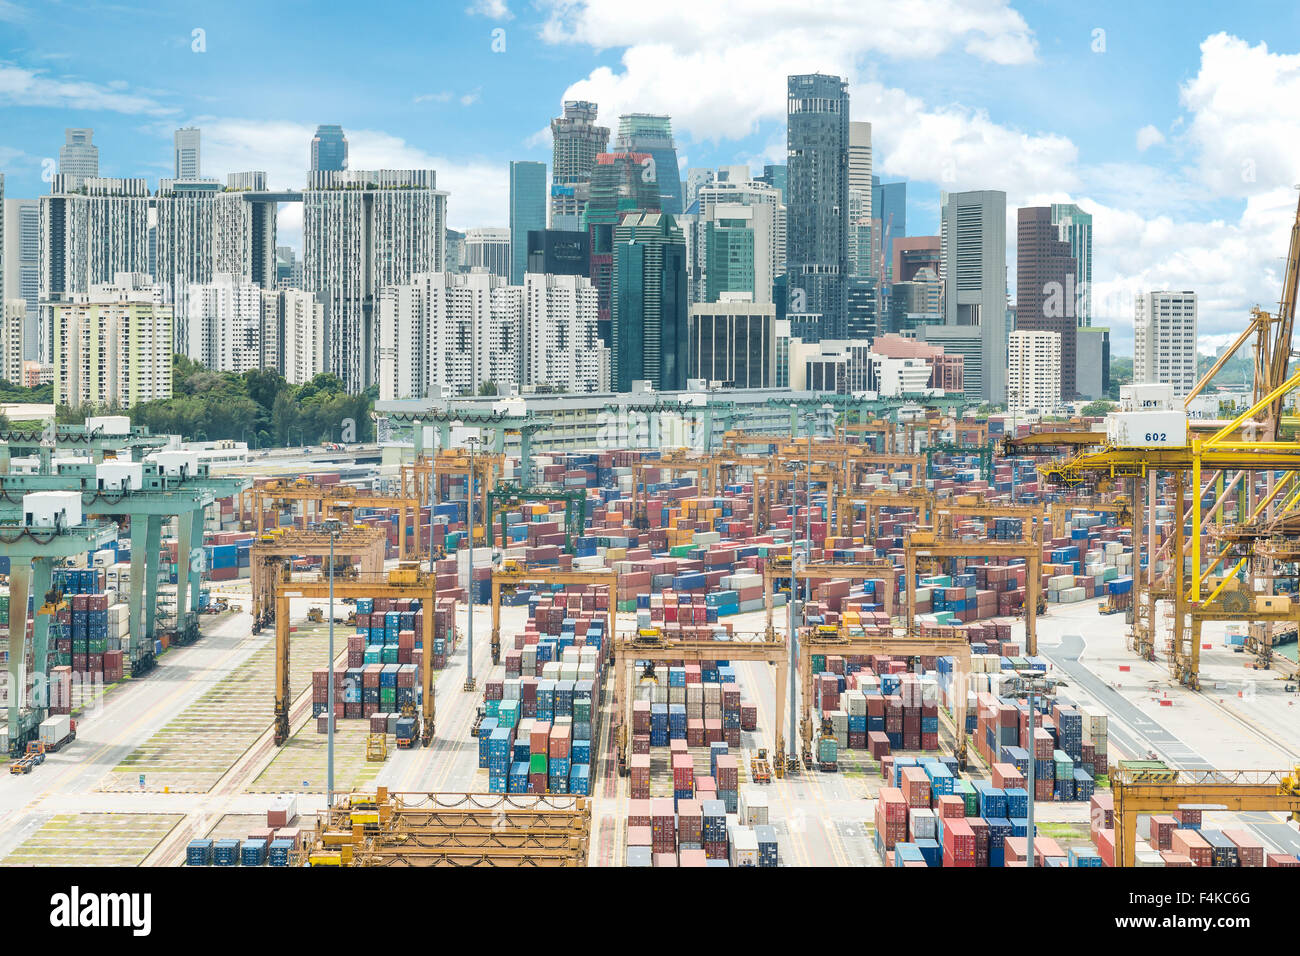 Aerial view of Singapore cargo container port and Singapore city background Stock Photo